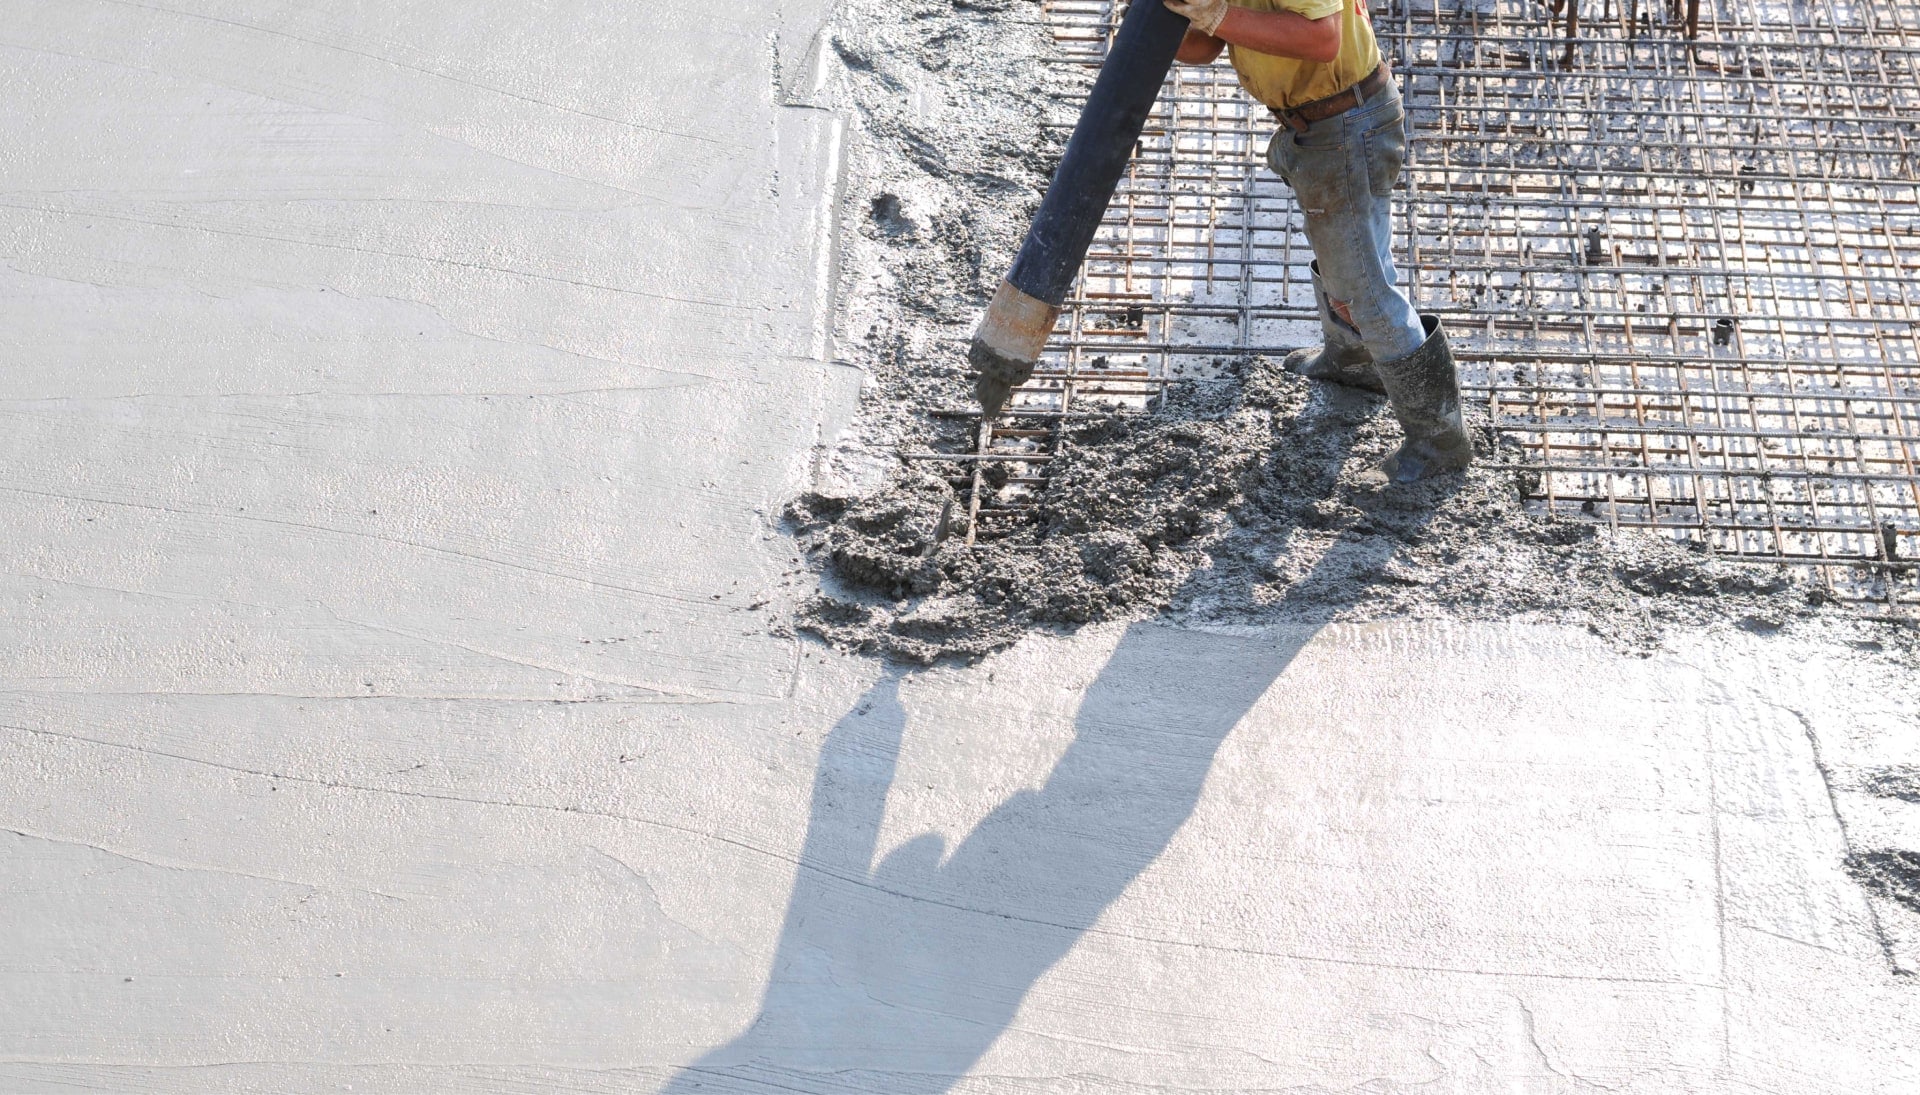 High-Quality Concrete Foundation Services in Denver, Colorado area for Residential or Commercial Projects